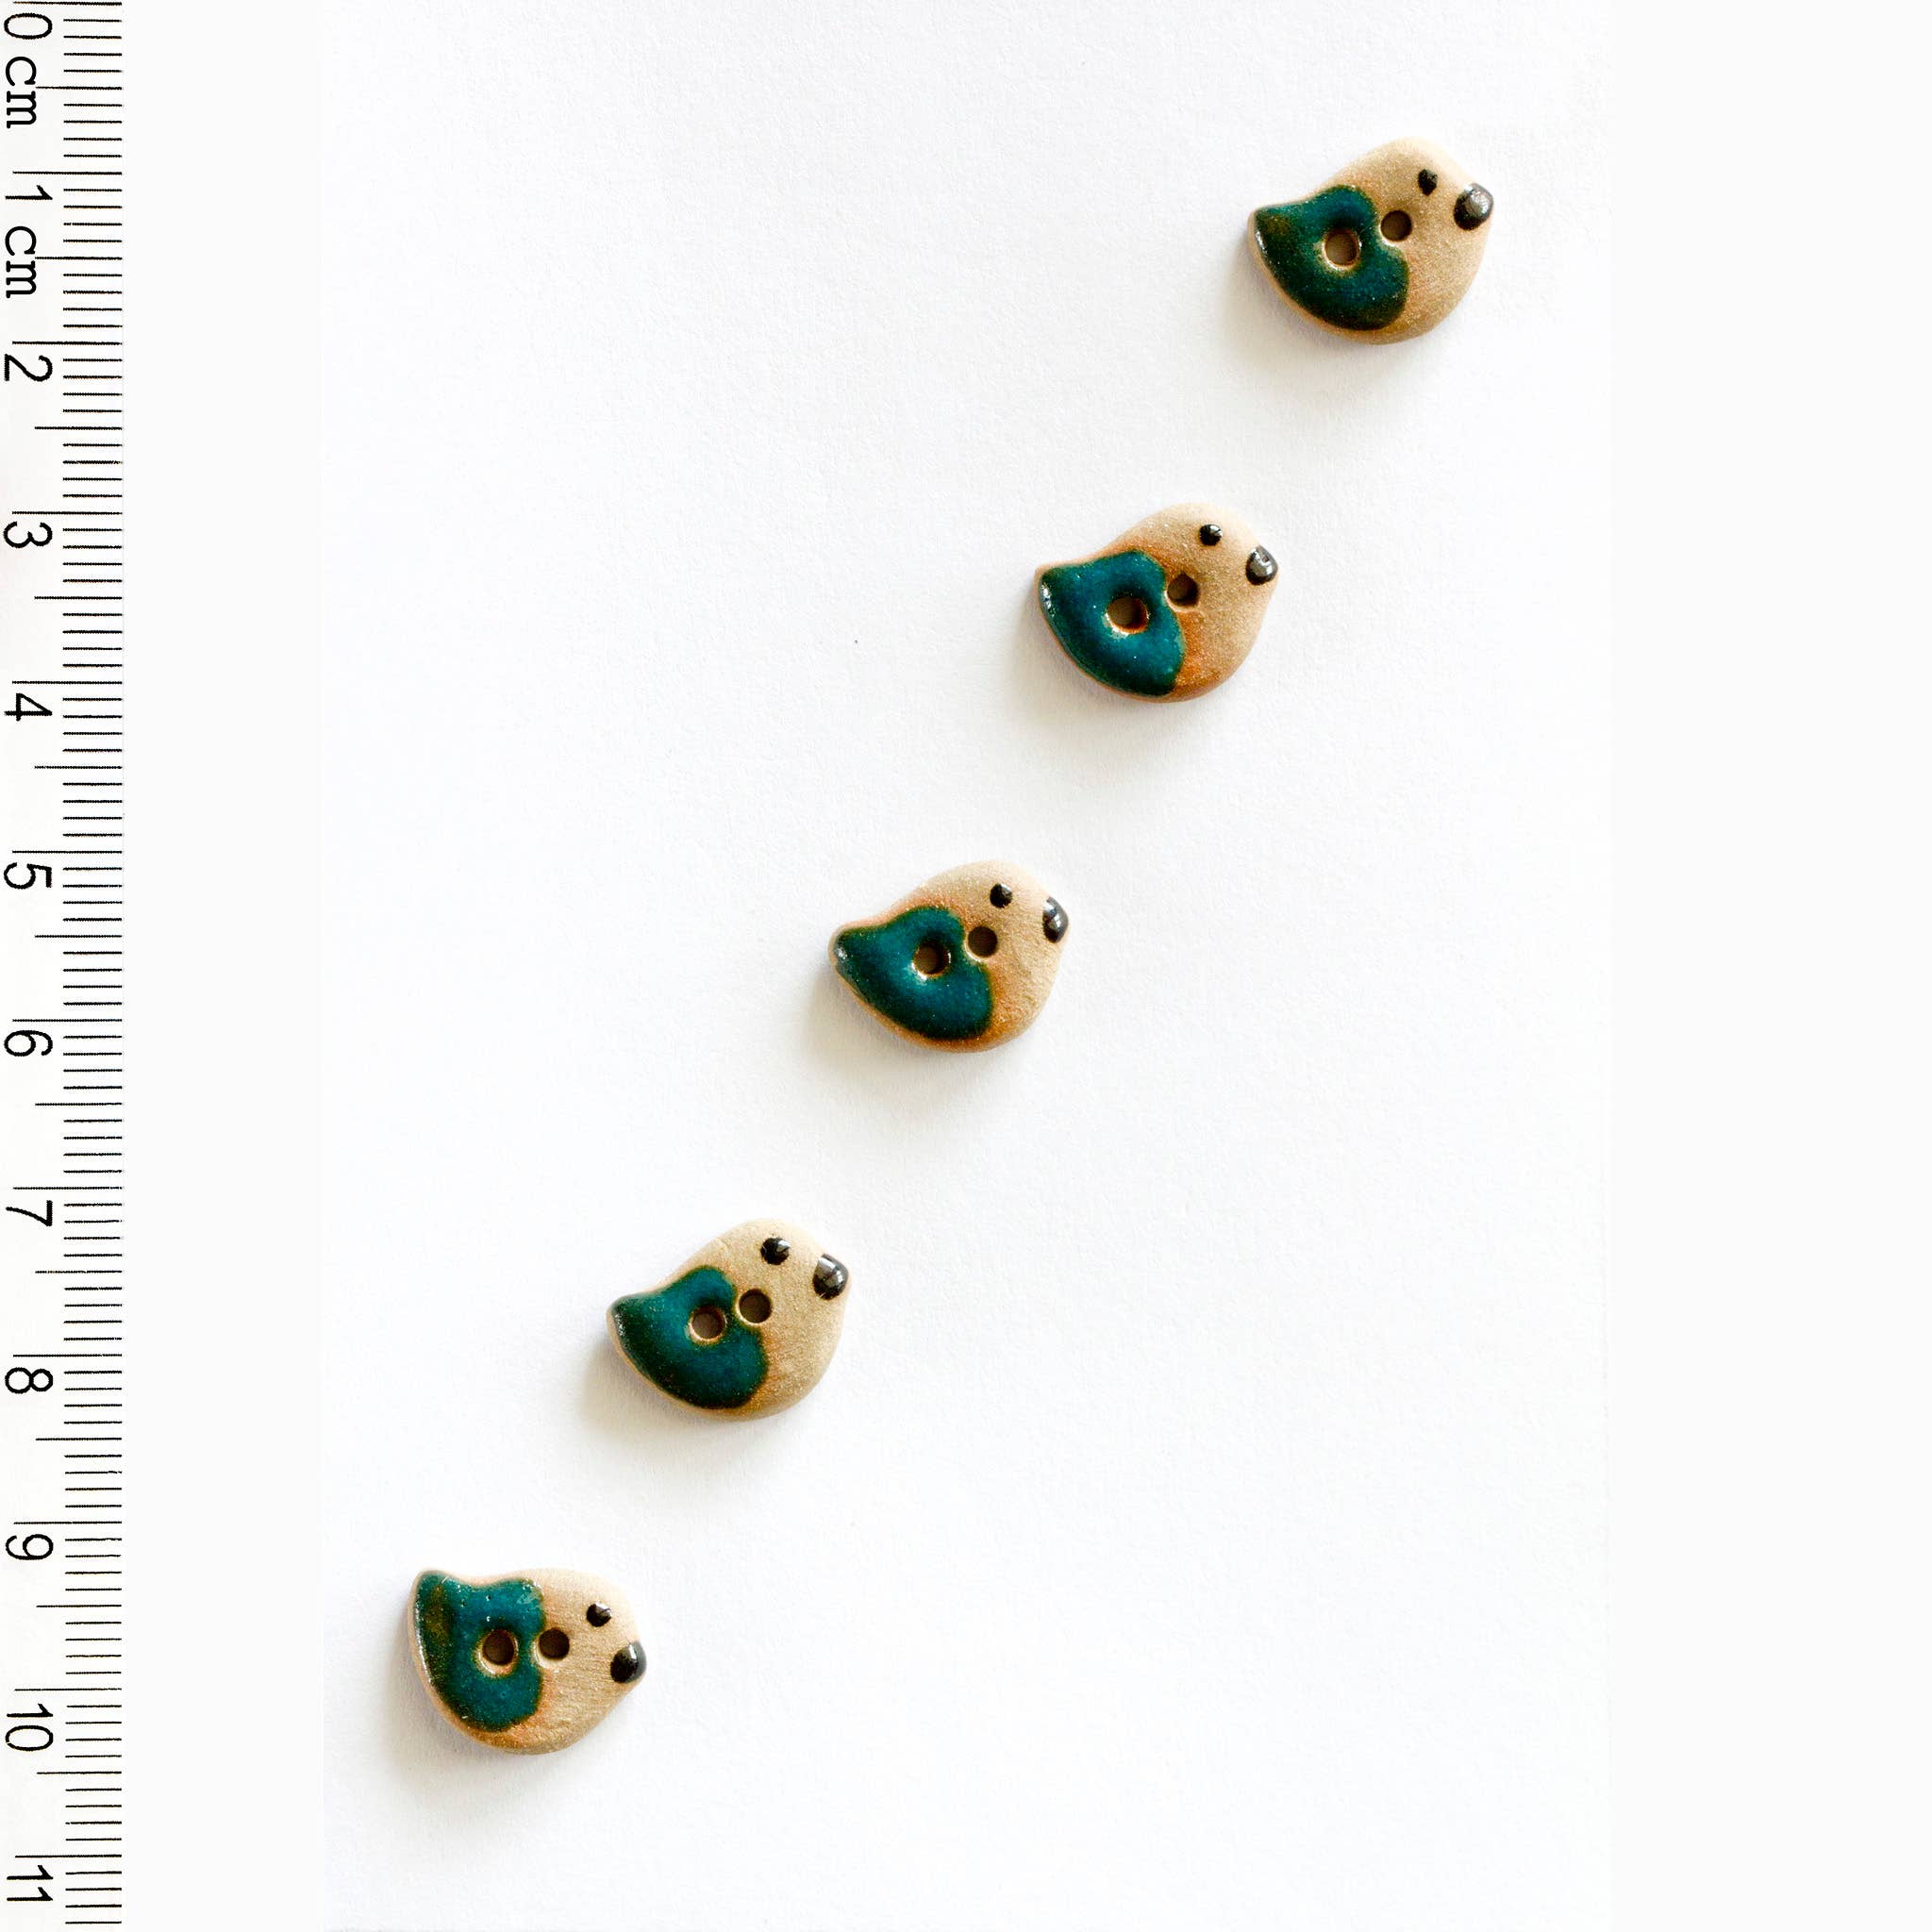 Incomparable Buttons - 5 Green Bird Buttons